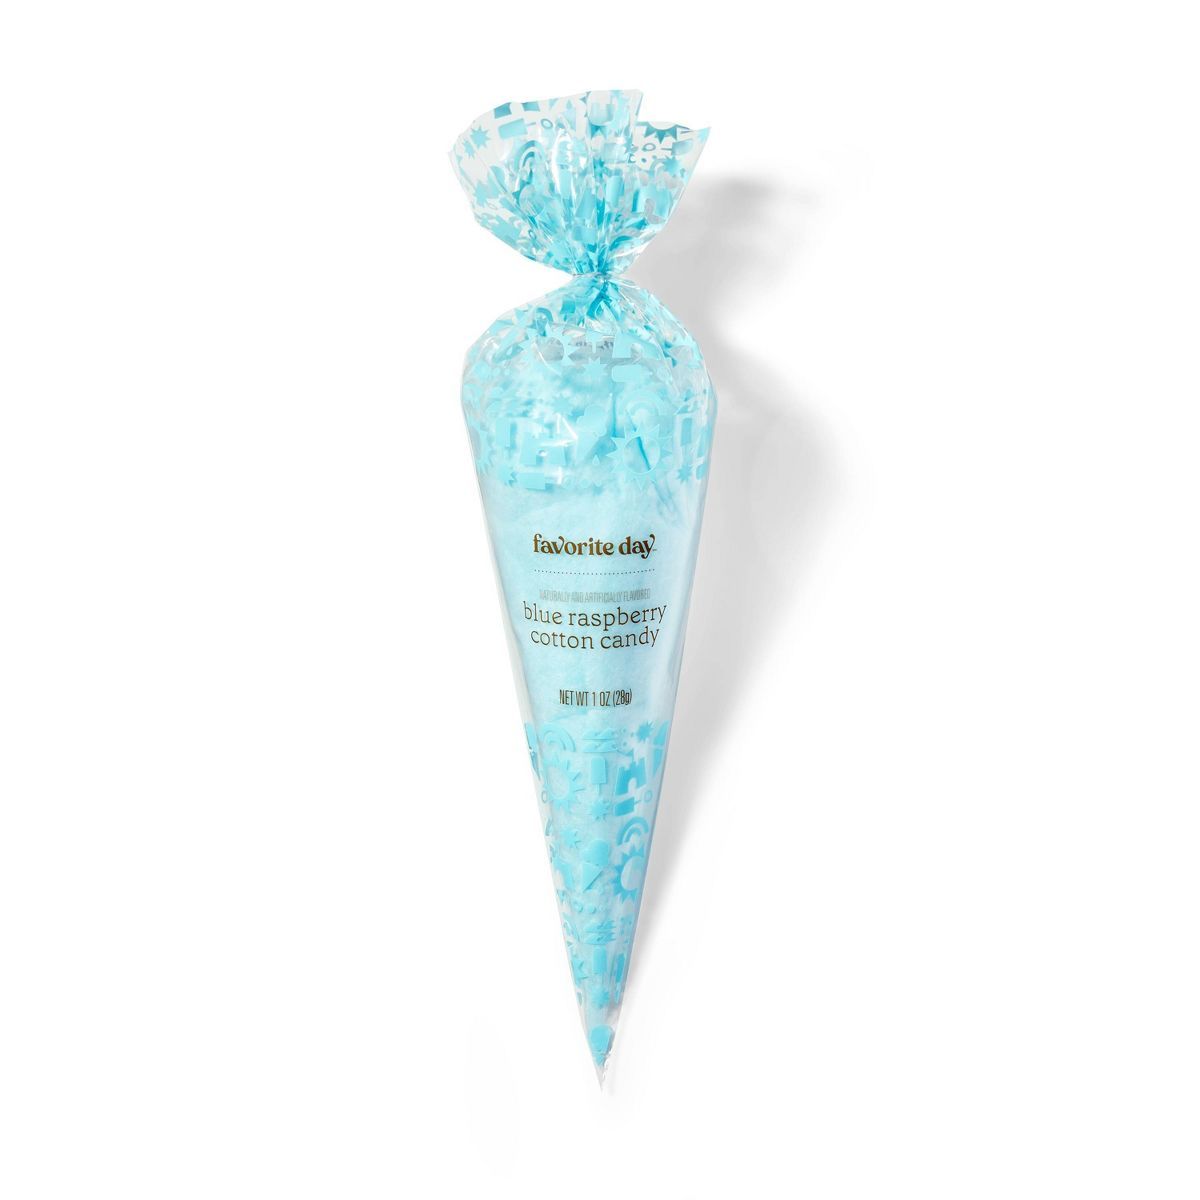 Blue Raspberry Cotton Candy Cone - 1oz - Favorite Day™ | Target